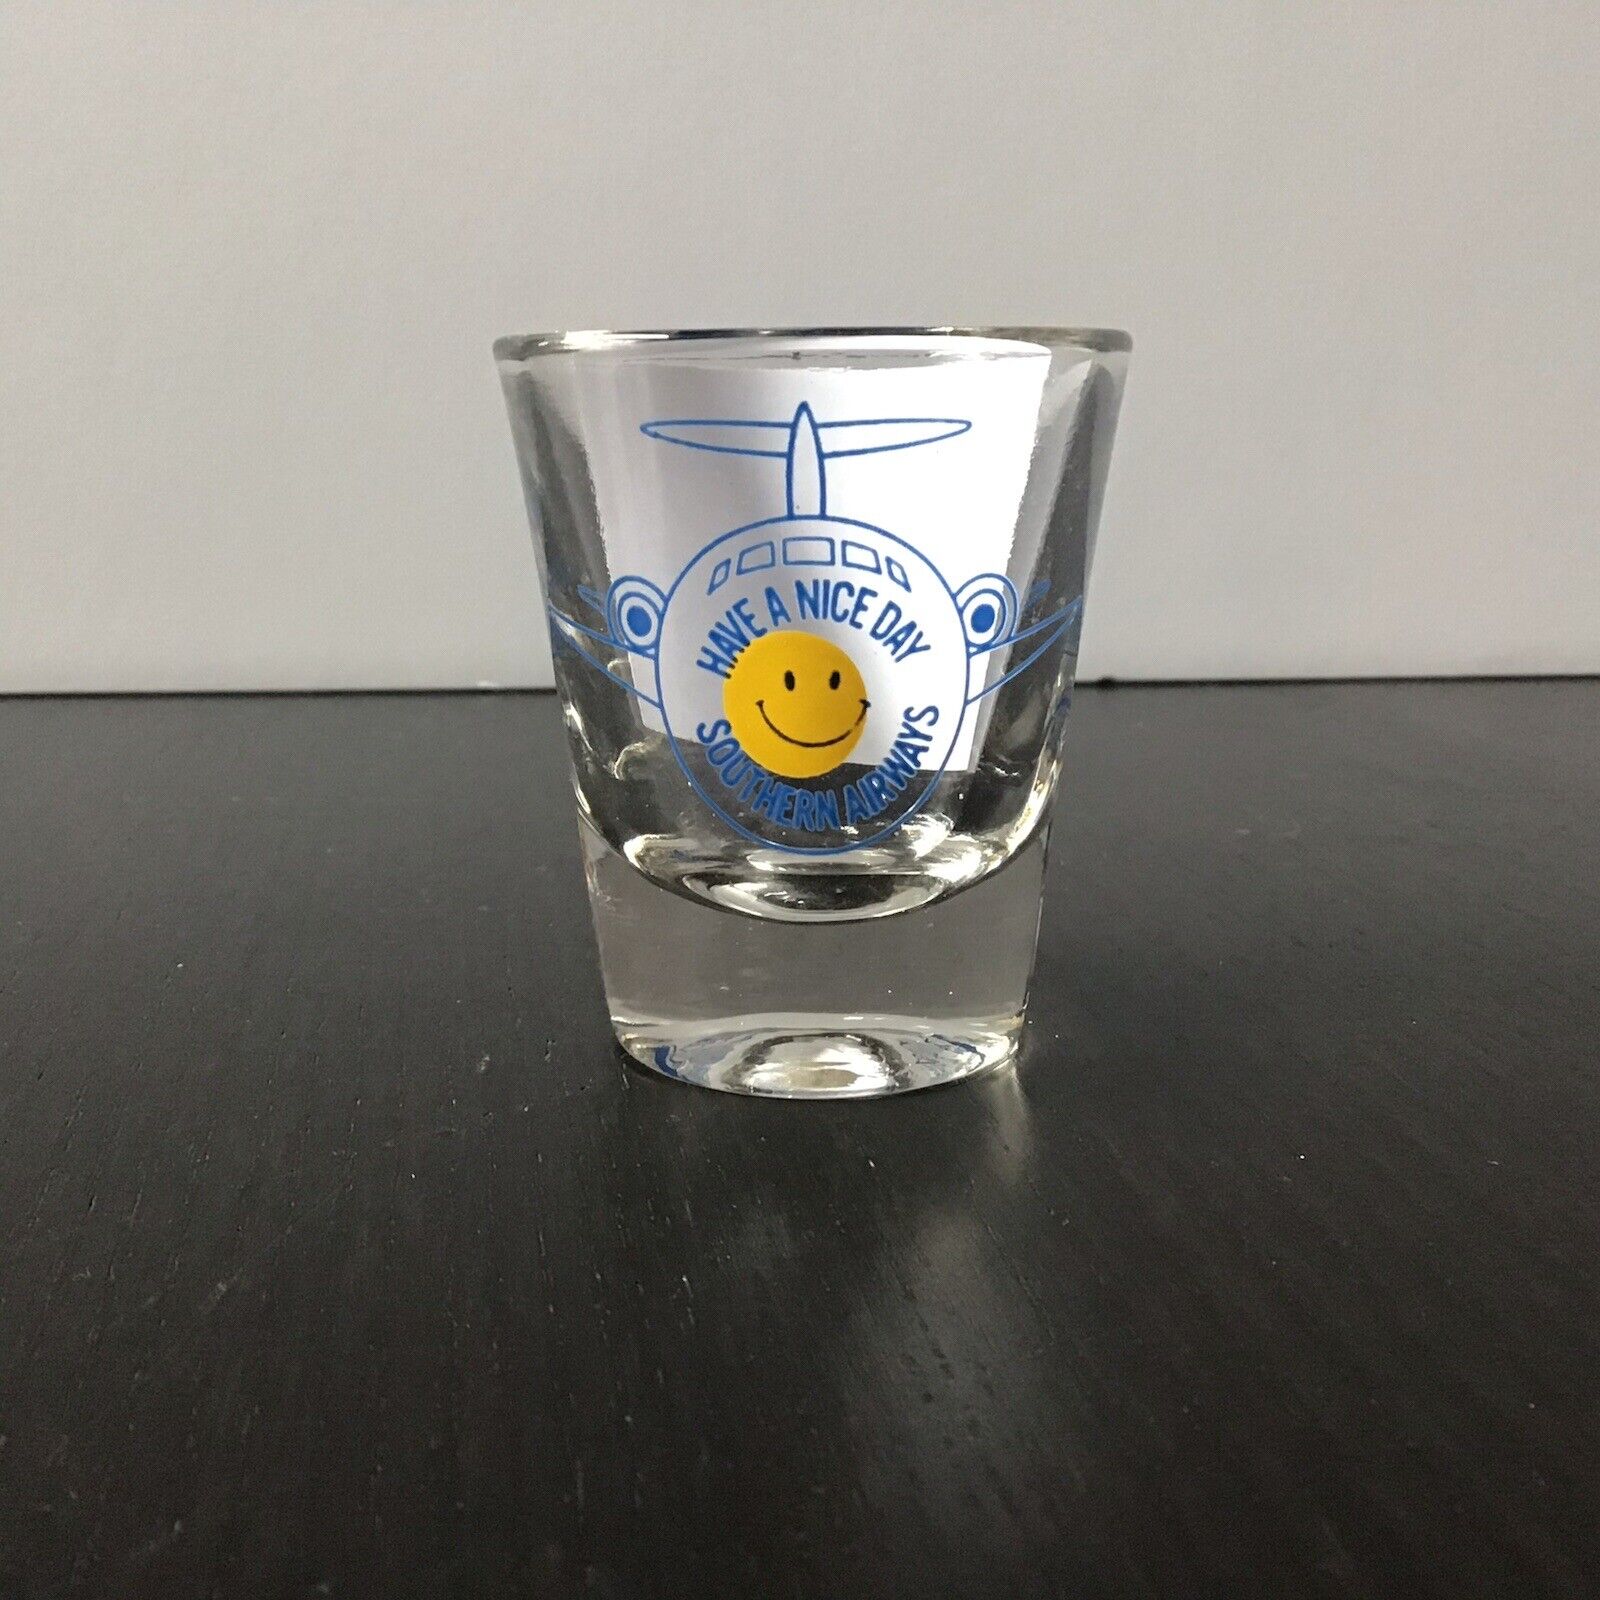 Southern Airways 1973 Anniversary Shotglass - Vintage Airlines Collectable